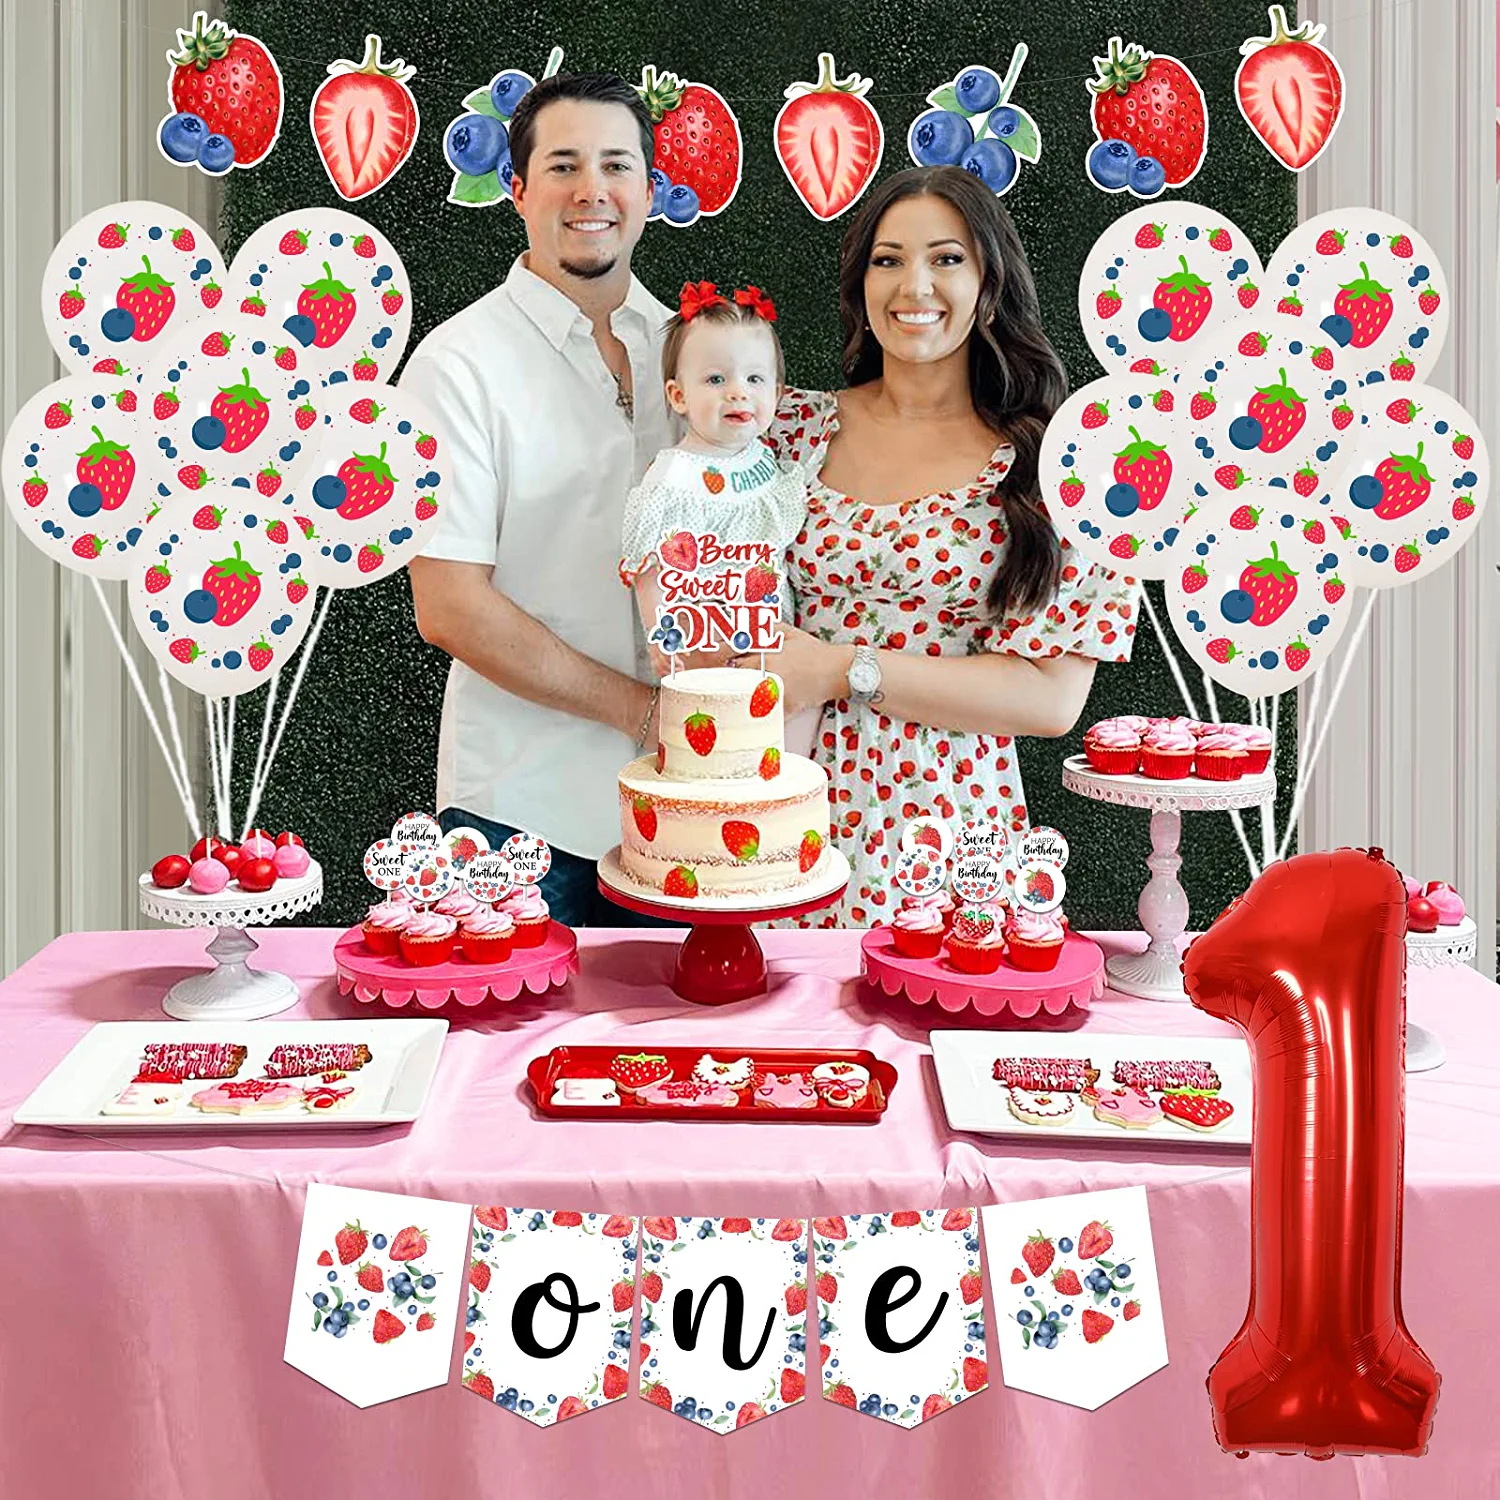 Strawberry 1st Birthday Party Decoration, Strawberry and Blueberry Themed Birthday Party Supplies Happy Birthday Banner Berry Sweet One Birthday Balloons Cake Toppers Decor for Girls 1st Birthday - Walmart.com